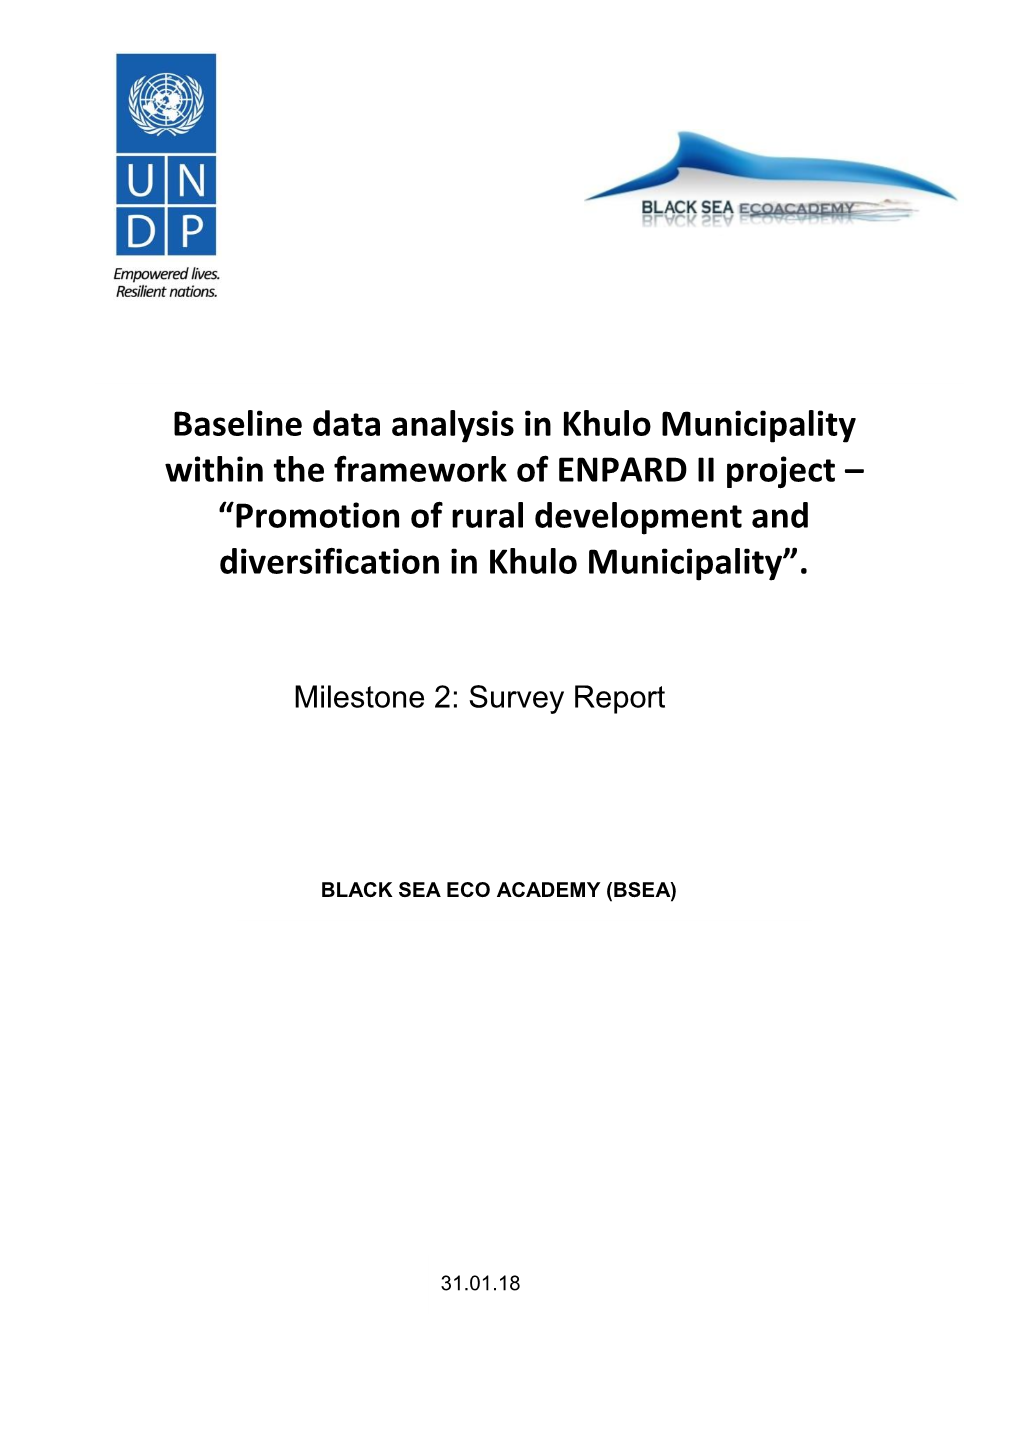 Baseline Data Analysis in Khulo Municipality Within the Framework of ENPARD II Project – “Promotion of Rural Development and Diversification in Khulo Municipality”